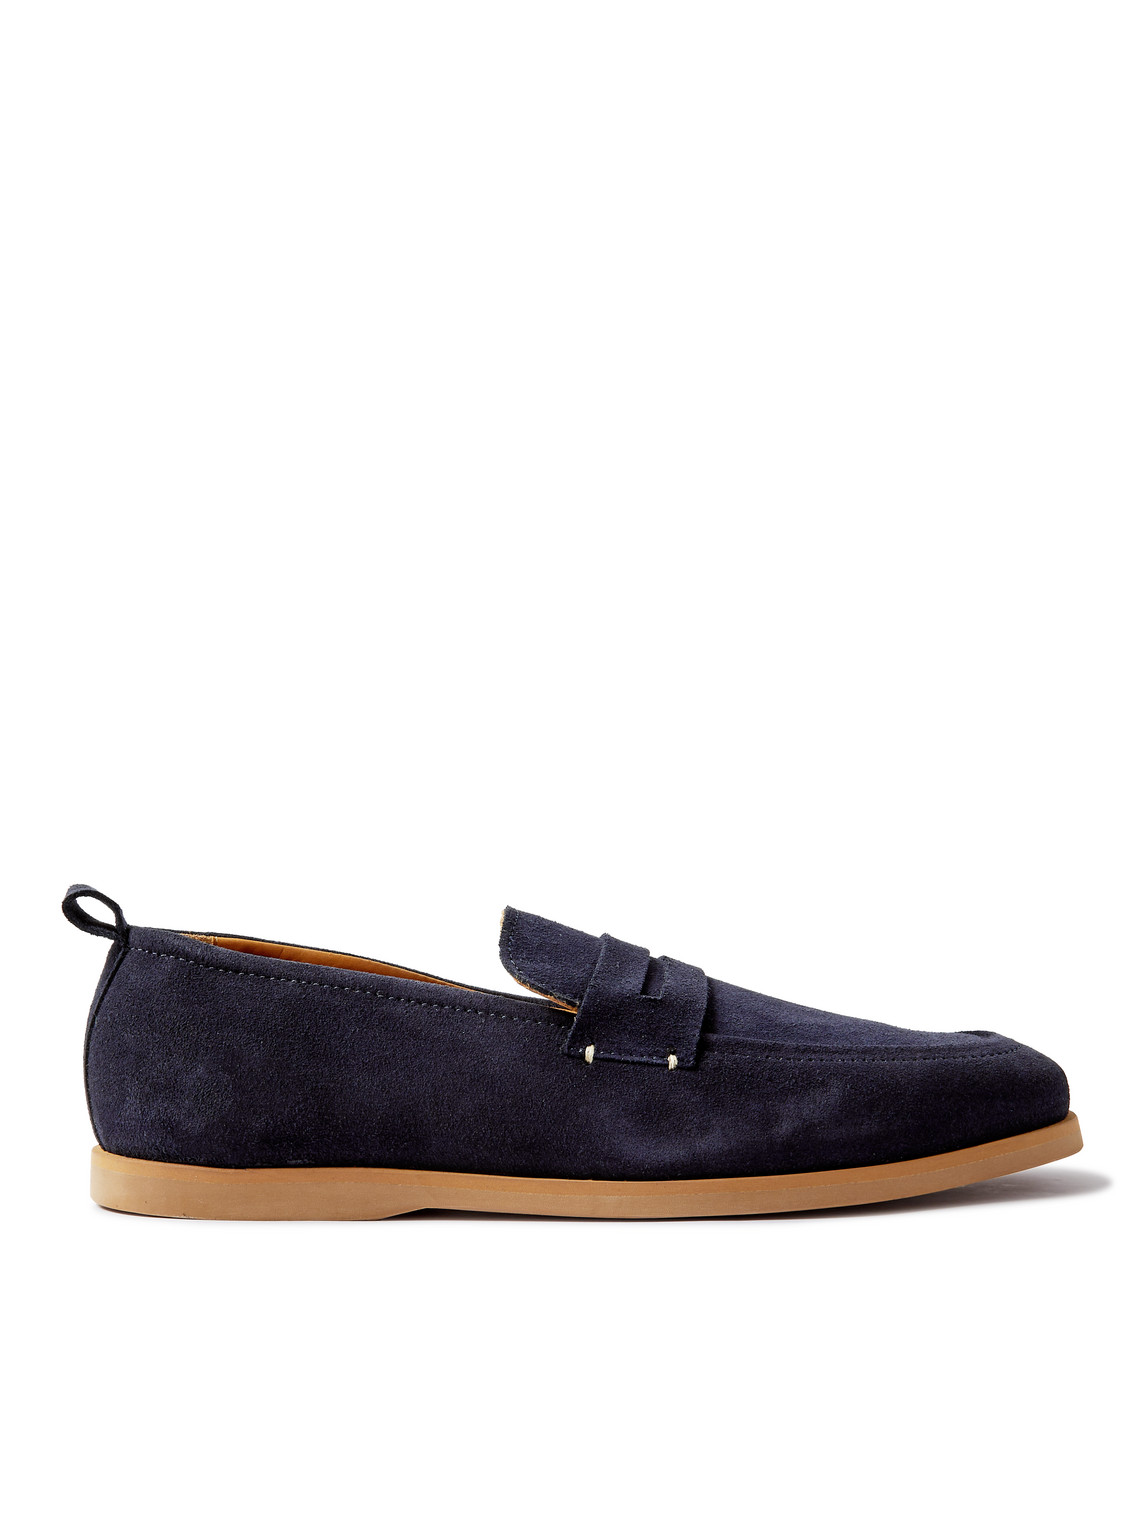 Mr P Regenerated Suede By Evolo® Penny Loafers In Blue